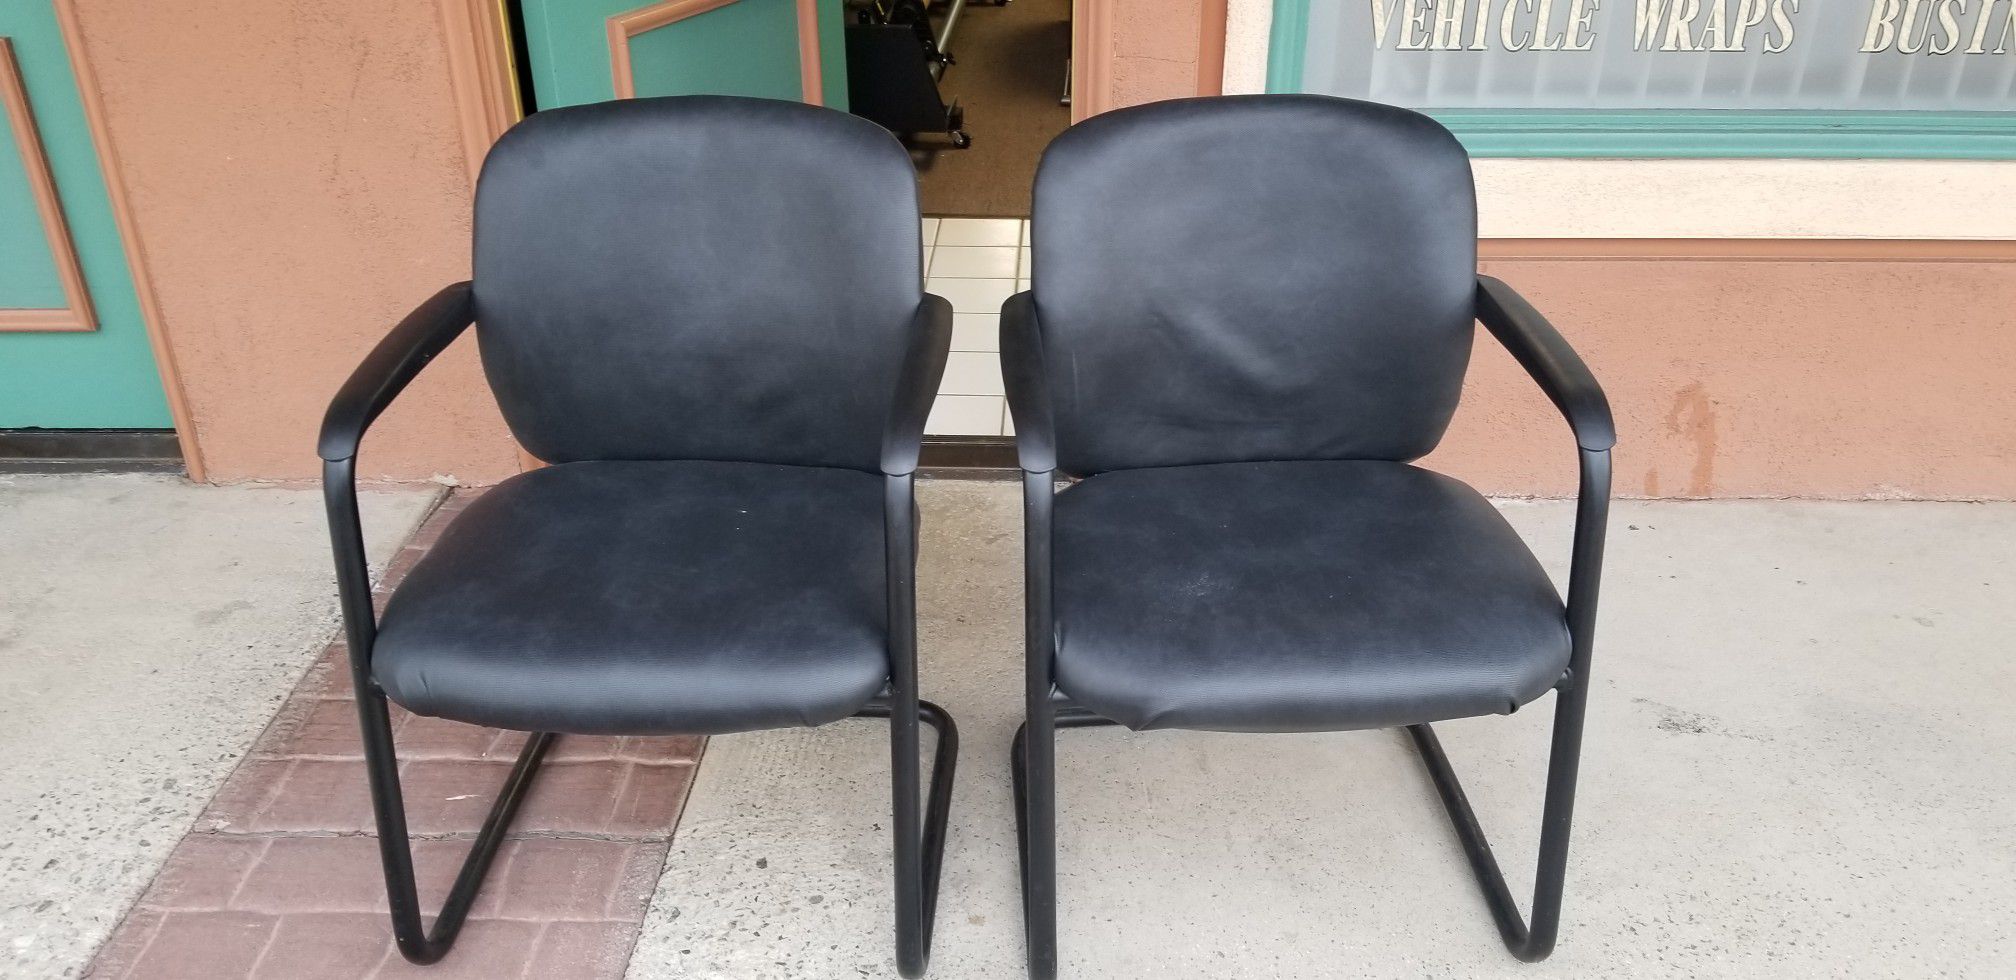 Office chairs in great condition